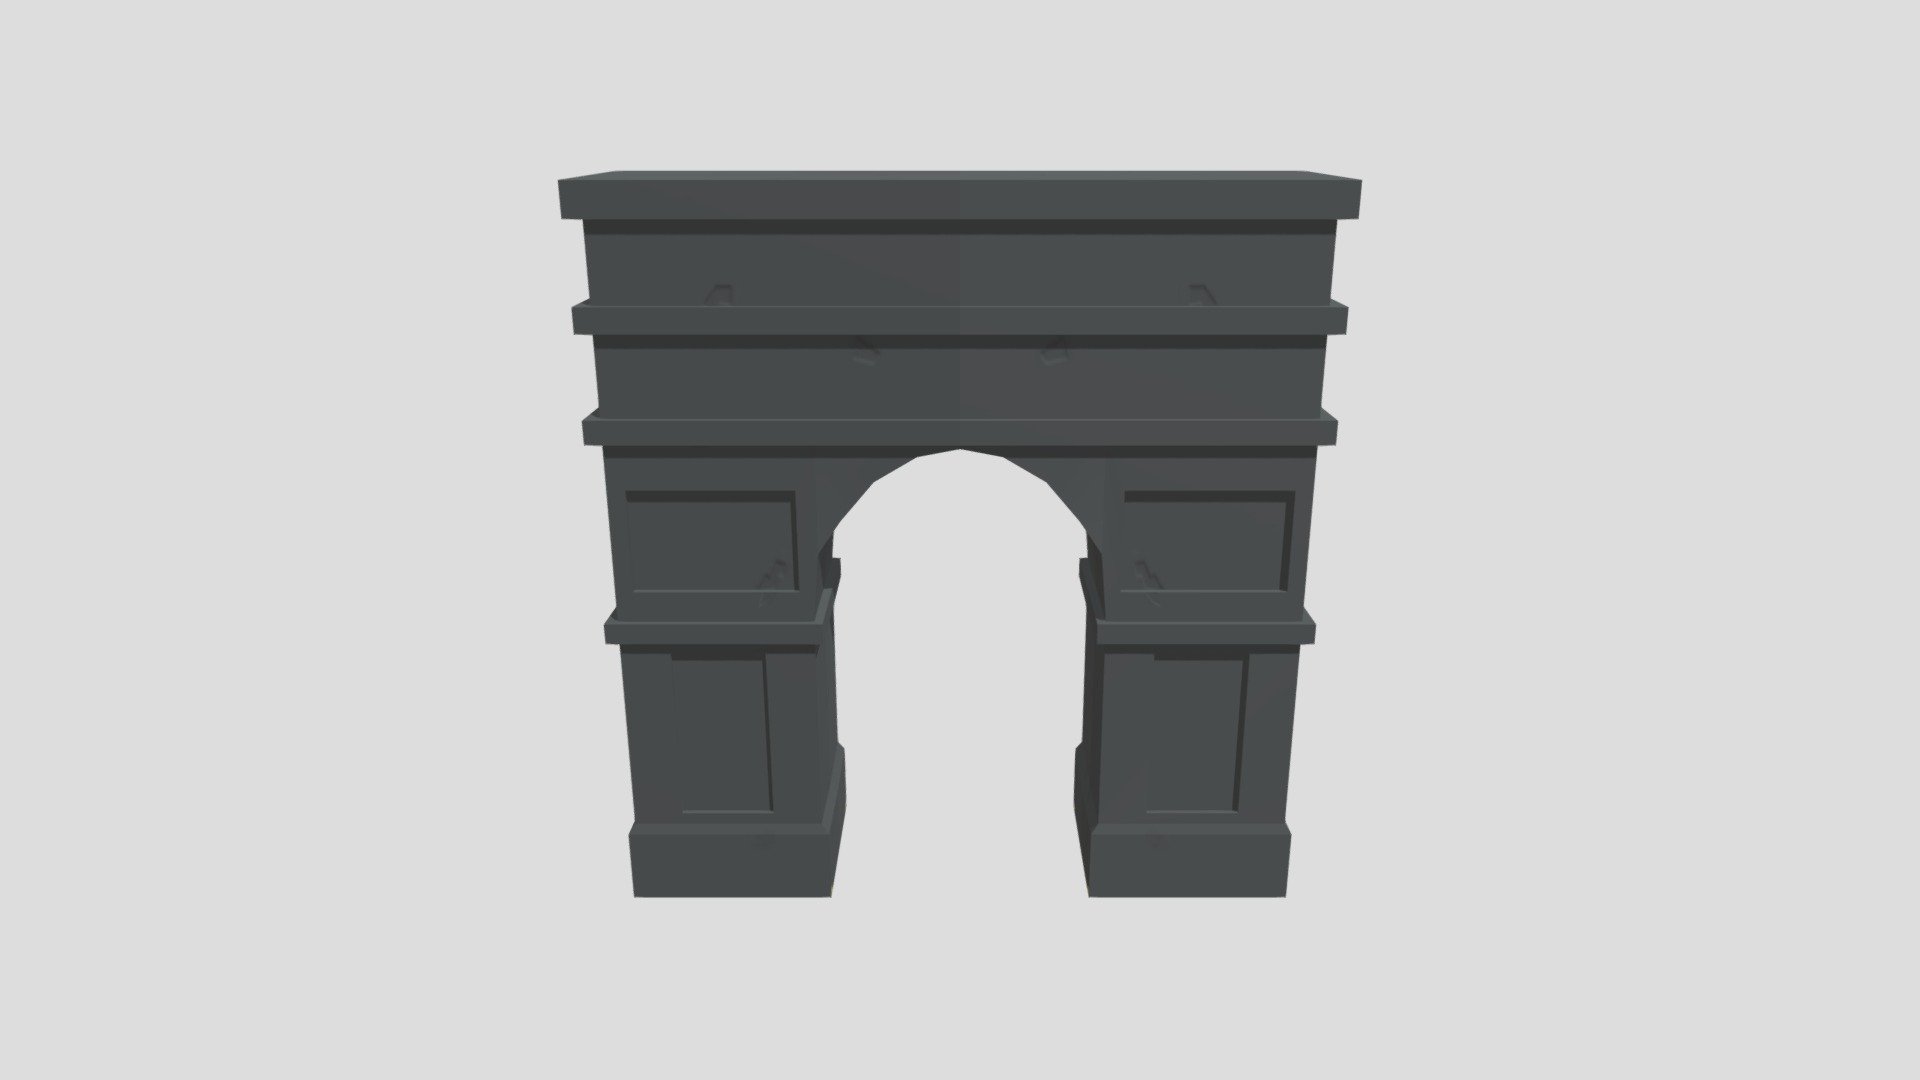 Arch Download Free 3d Model By Nyugradalley2020 7304acd Sketchfab